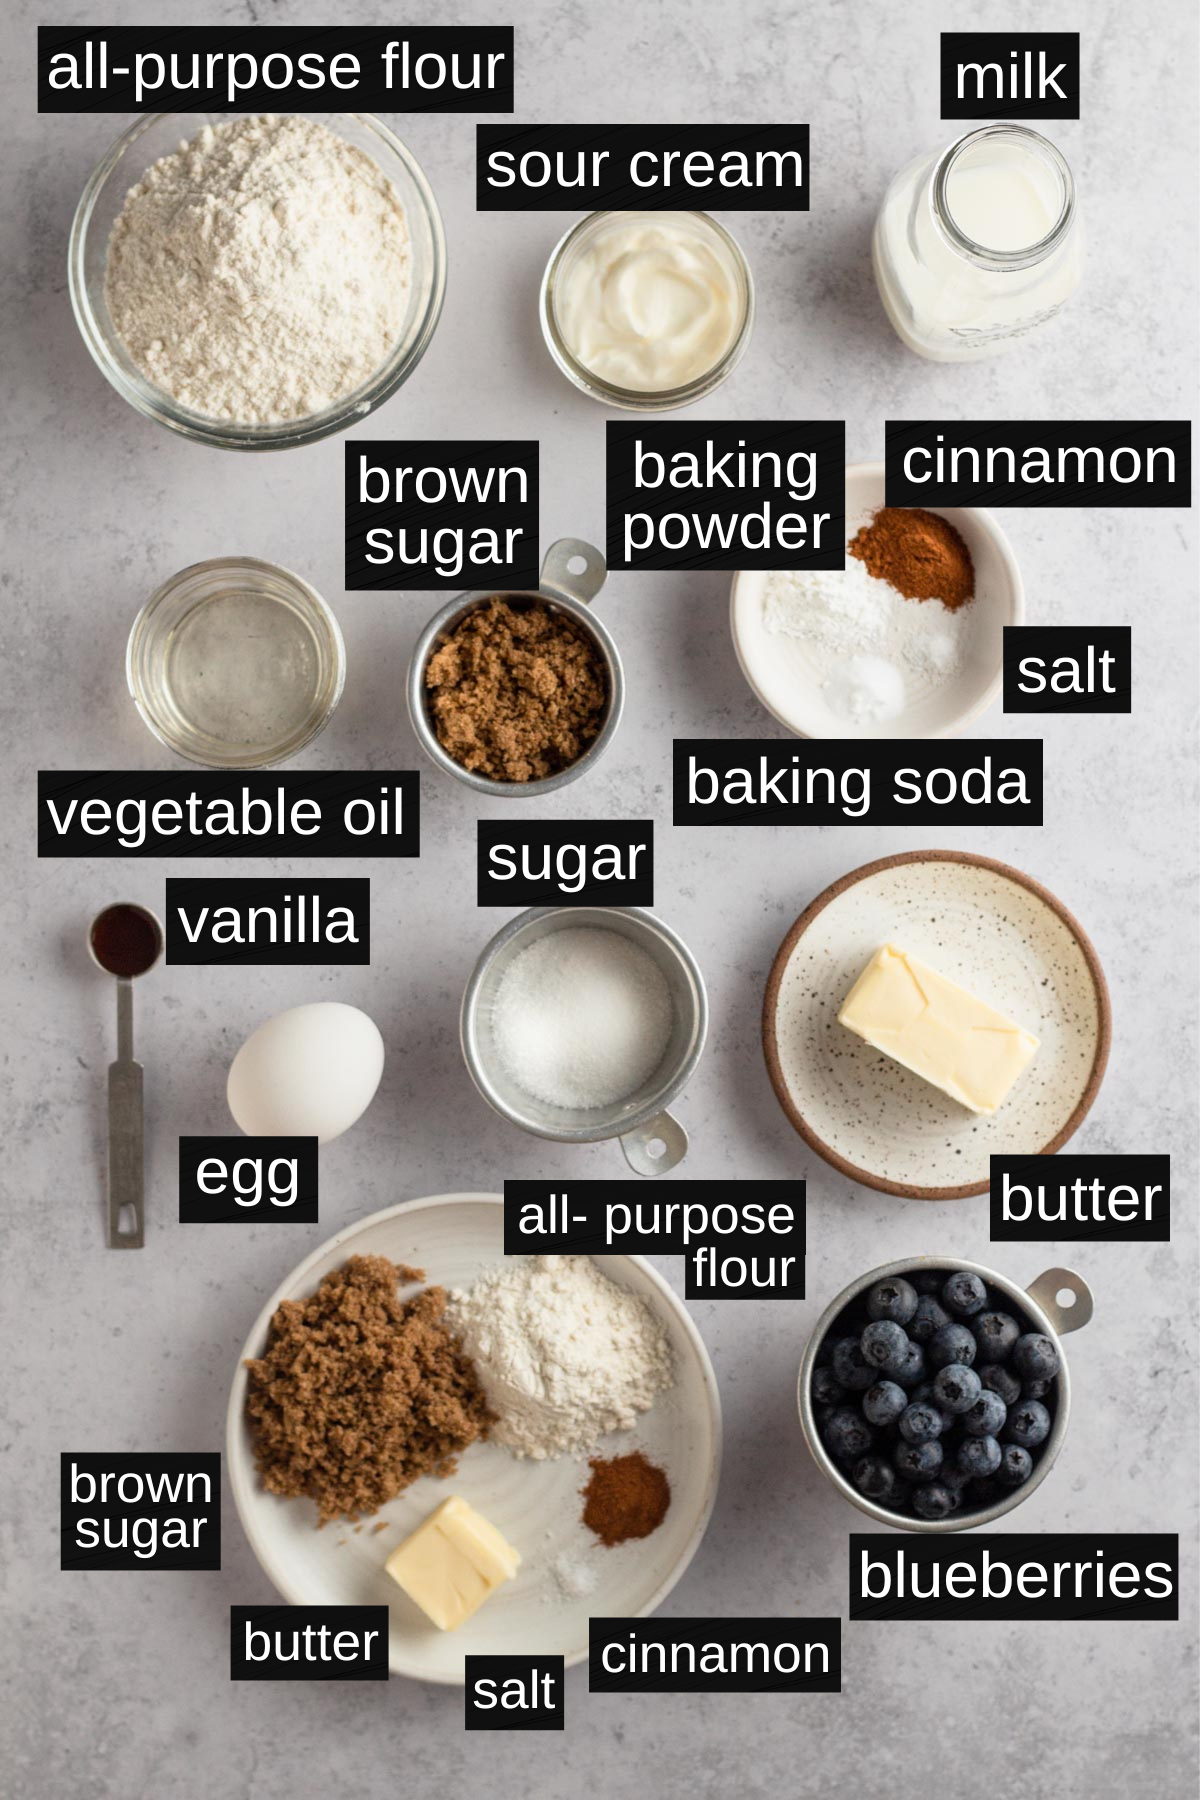 Recipe ingredients with labels on a white surface.